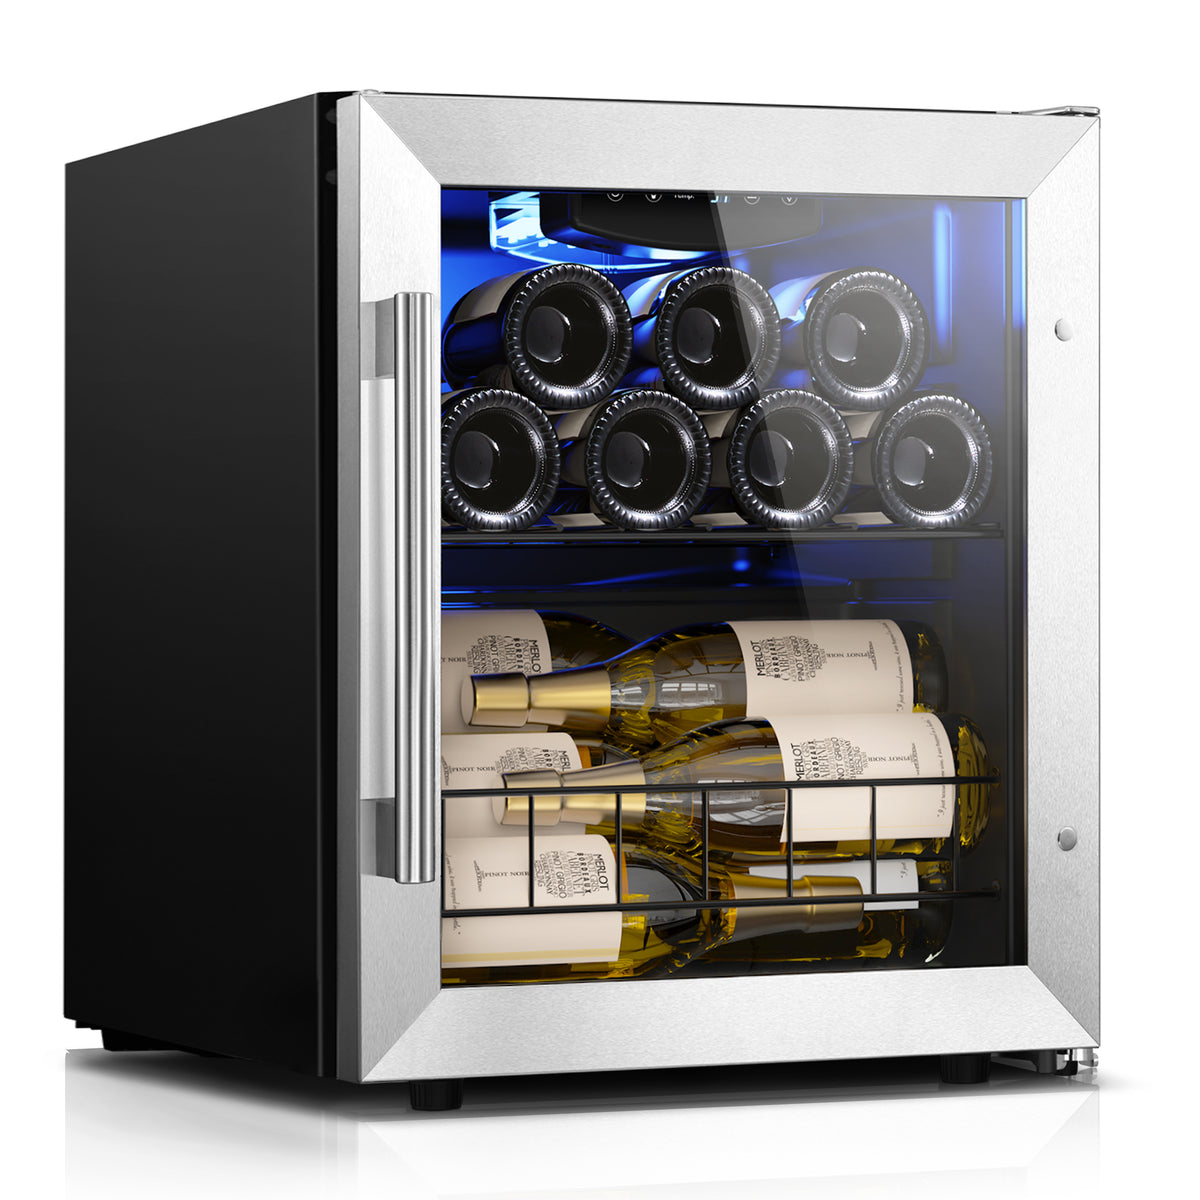 Yeego 12 Bottle Mini Compact Wine Fridge, A Chic Countertop Cooler Designed for Showcasing